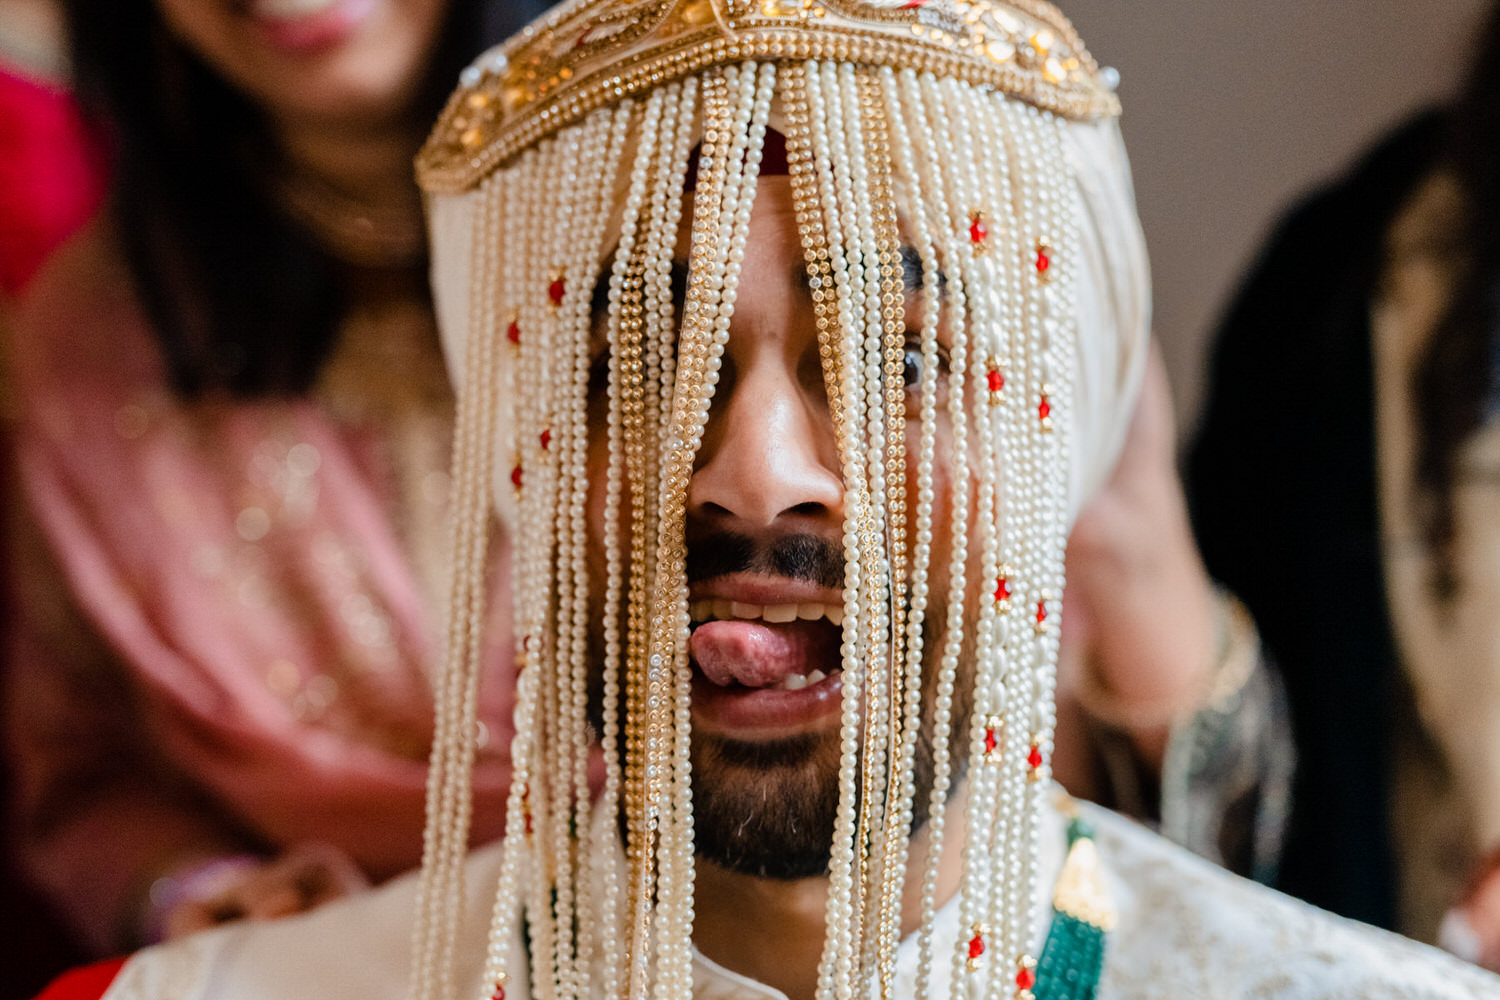 a close up of a person with beads on their head.